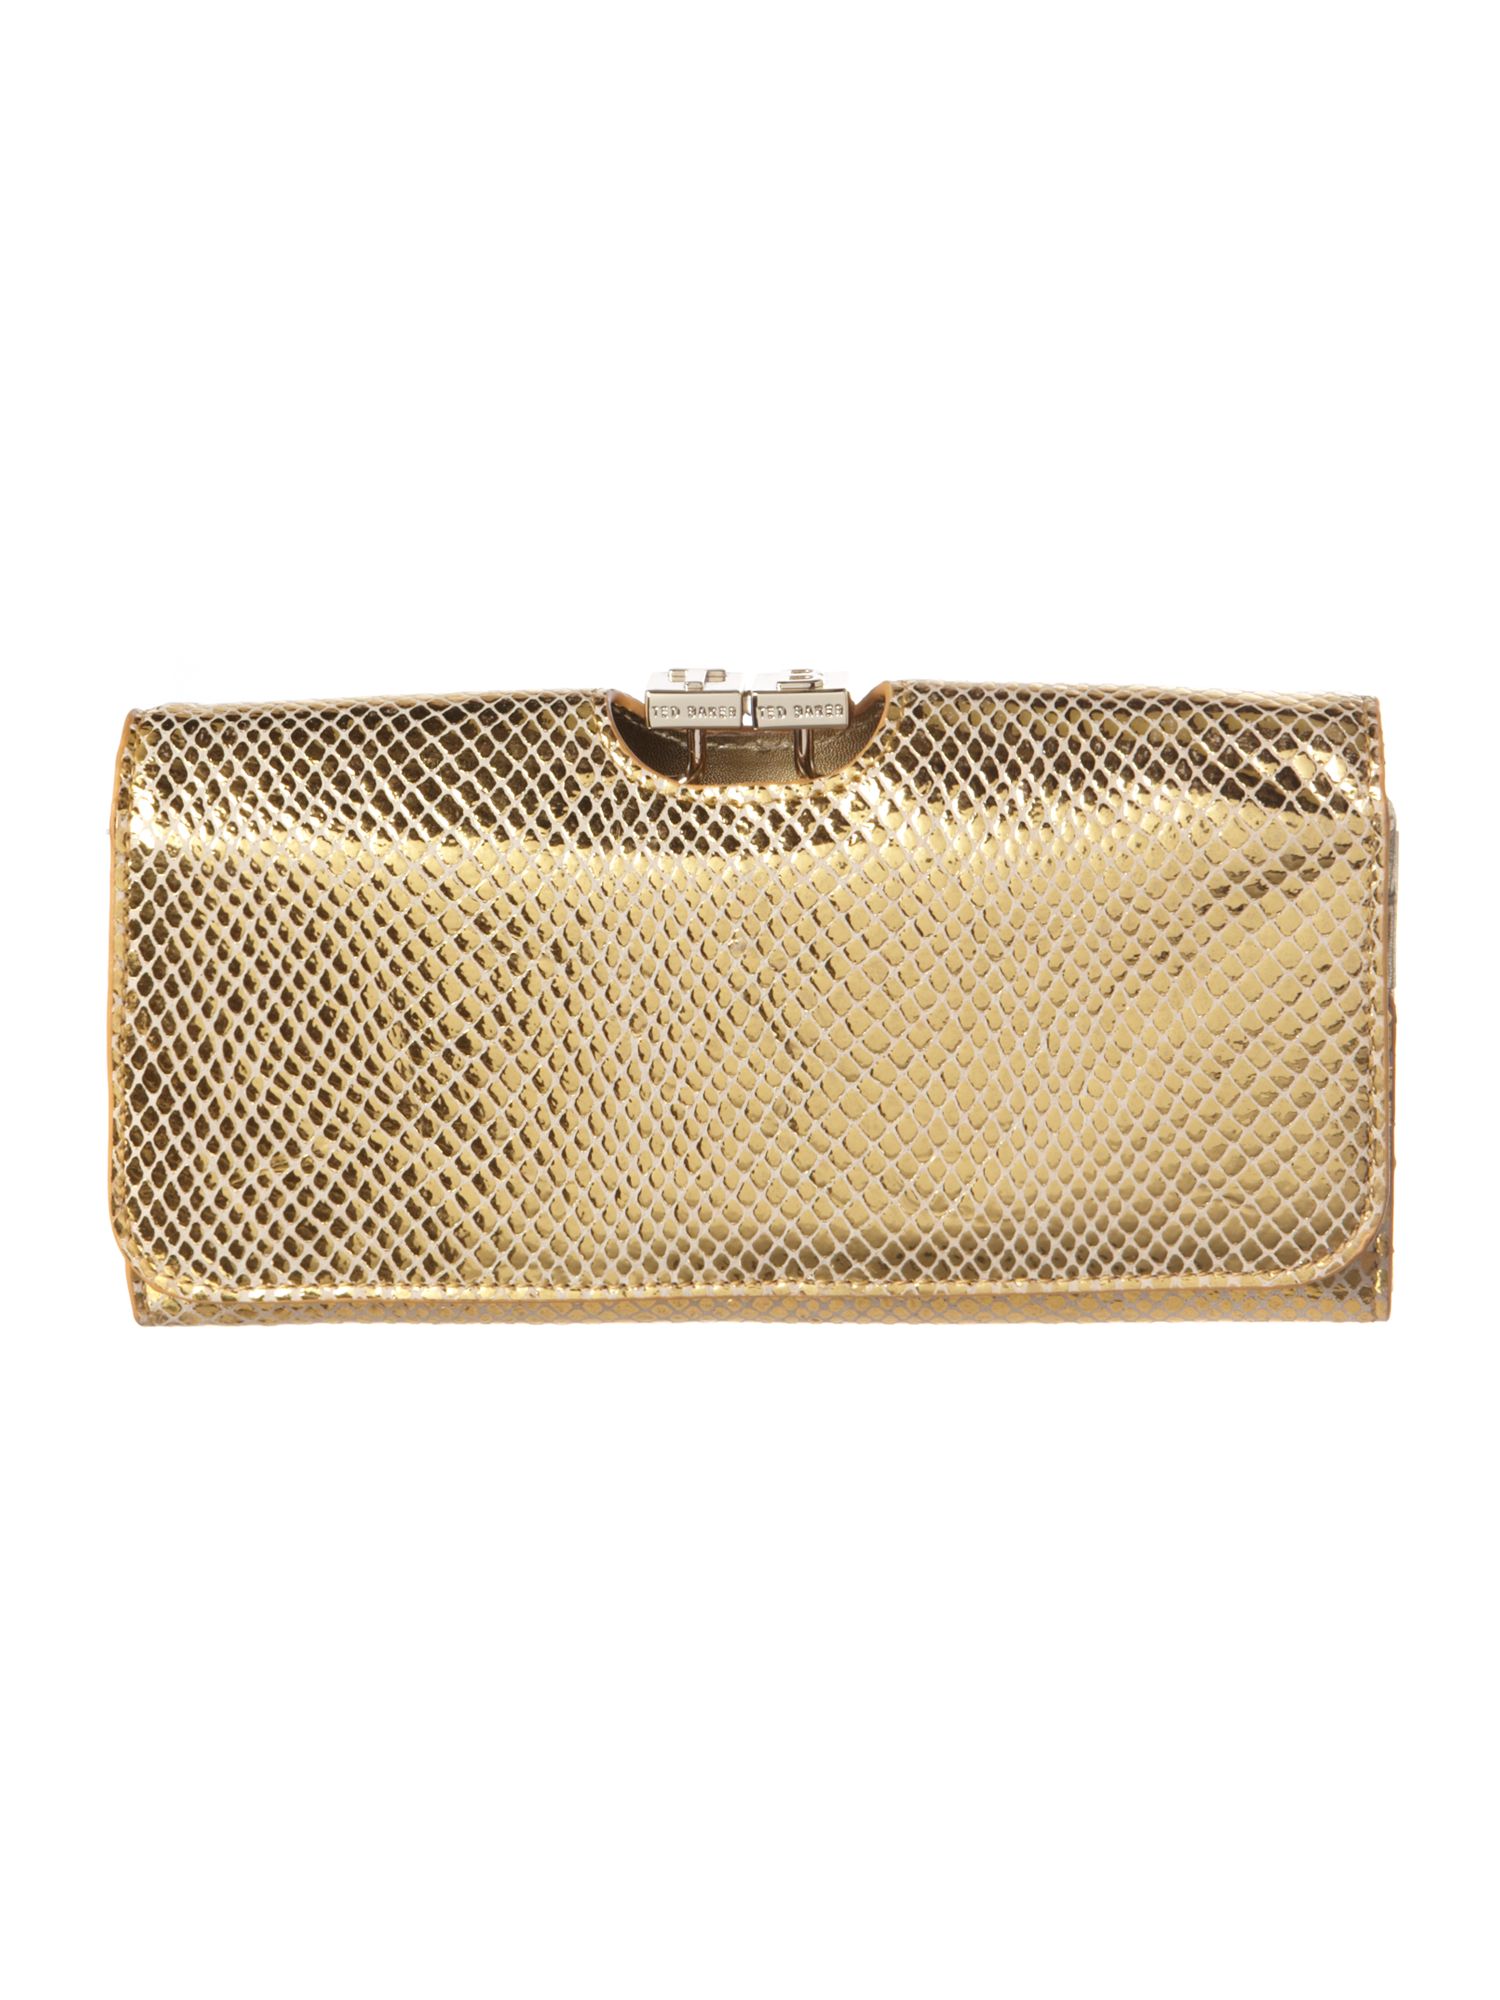 Ted Baker Met Snake Flap Over Purse in Gold (metallic) | Lyst